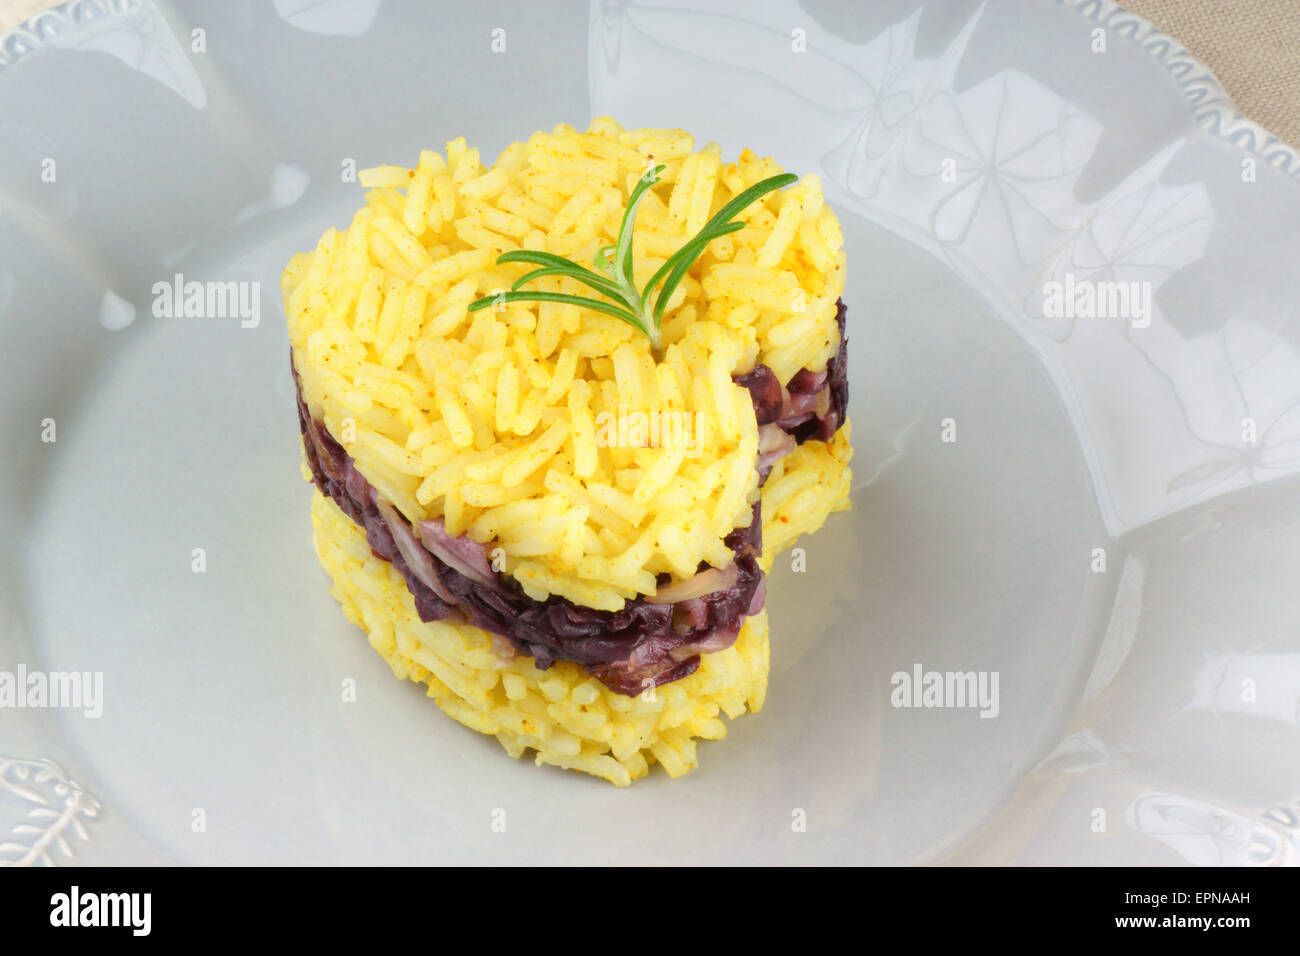 Heart shaped saffron rice with trevisano chicory, served on a grey plate. Idea for a Valentine's day dish. Stock Photo